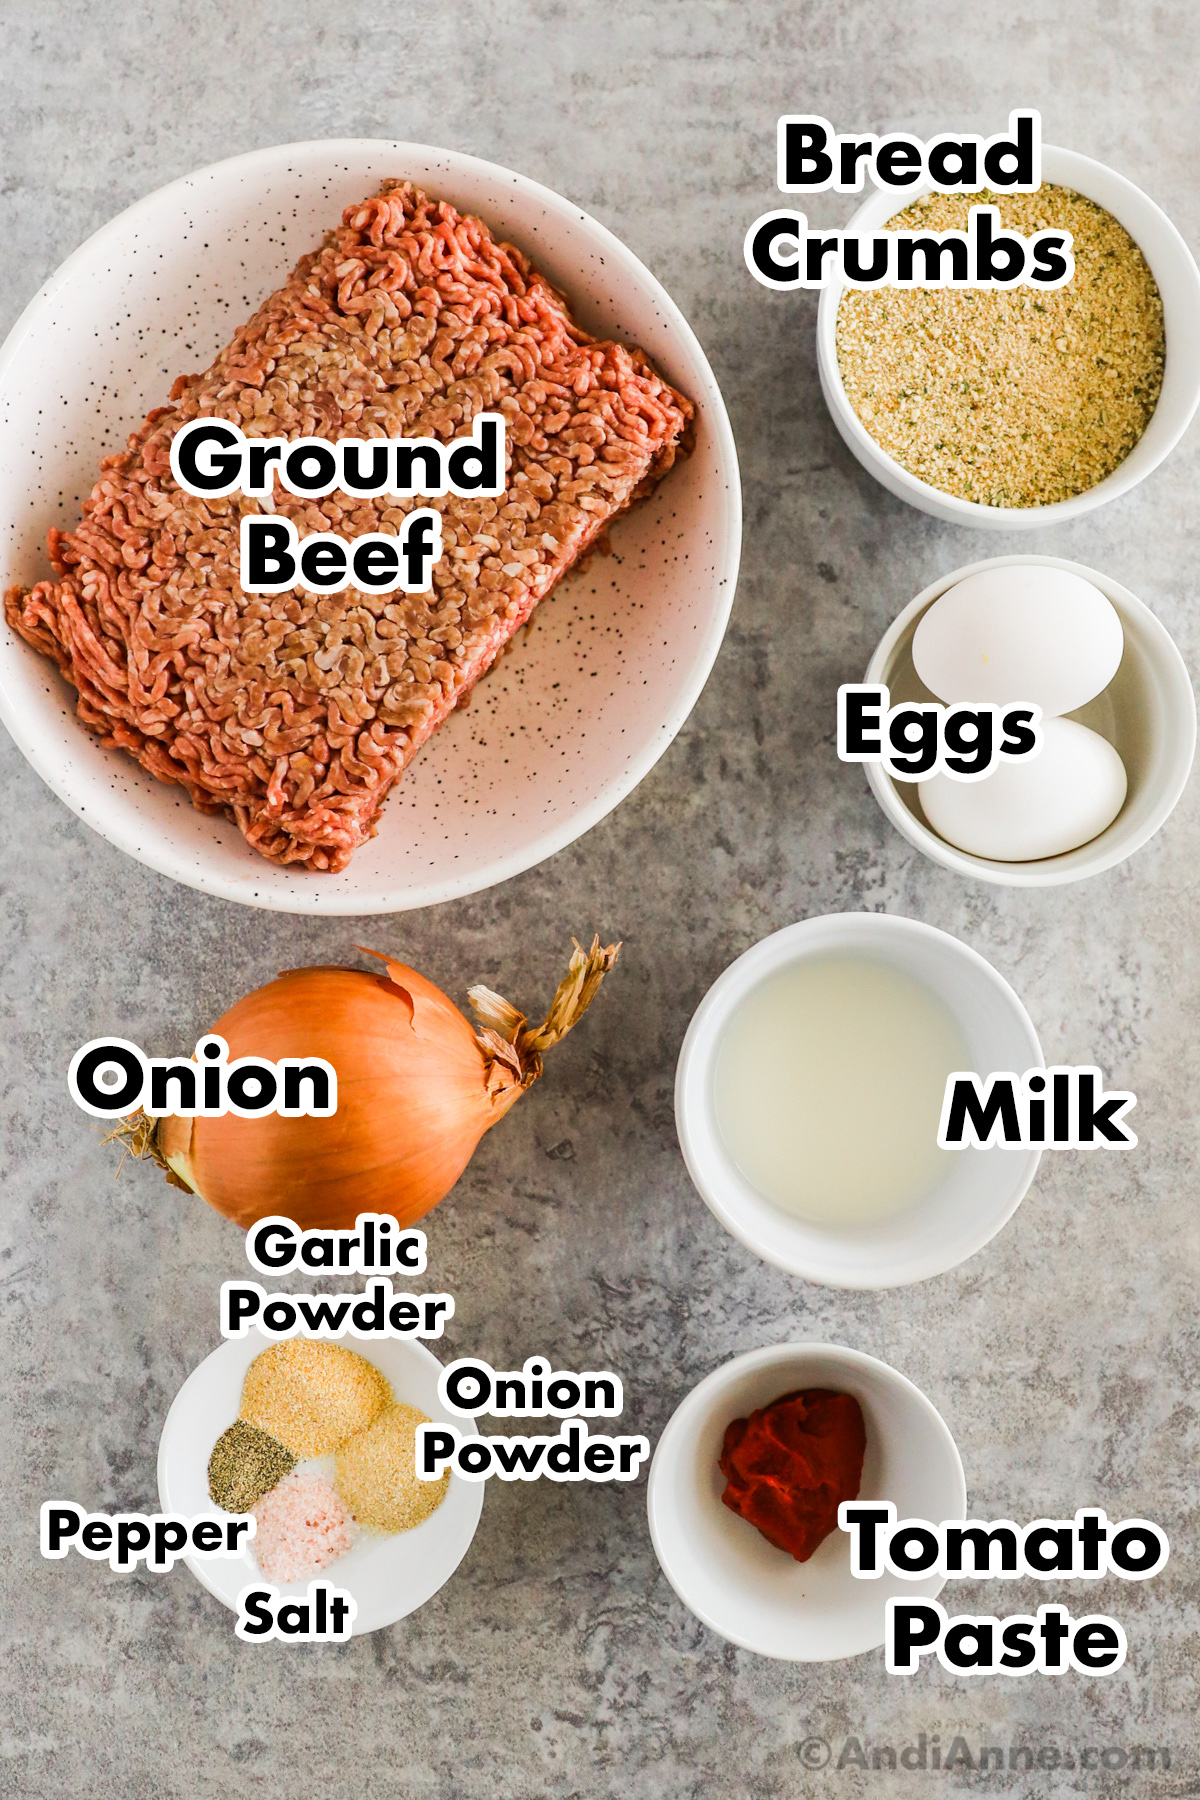 Recipe ingredients on a counter including raw ground beef, bowl of bread crumbs, eggs, milk, onion, spices and tomato paste.